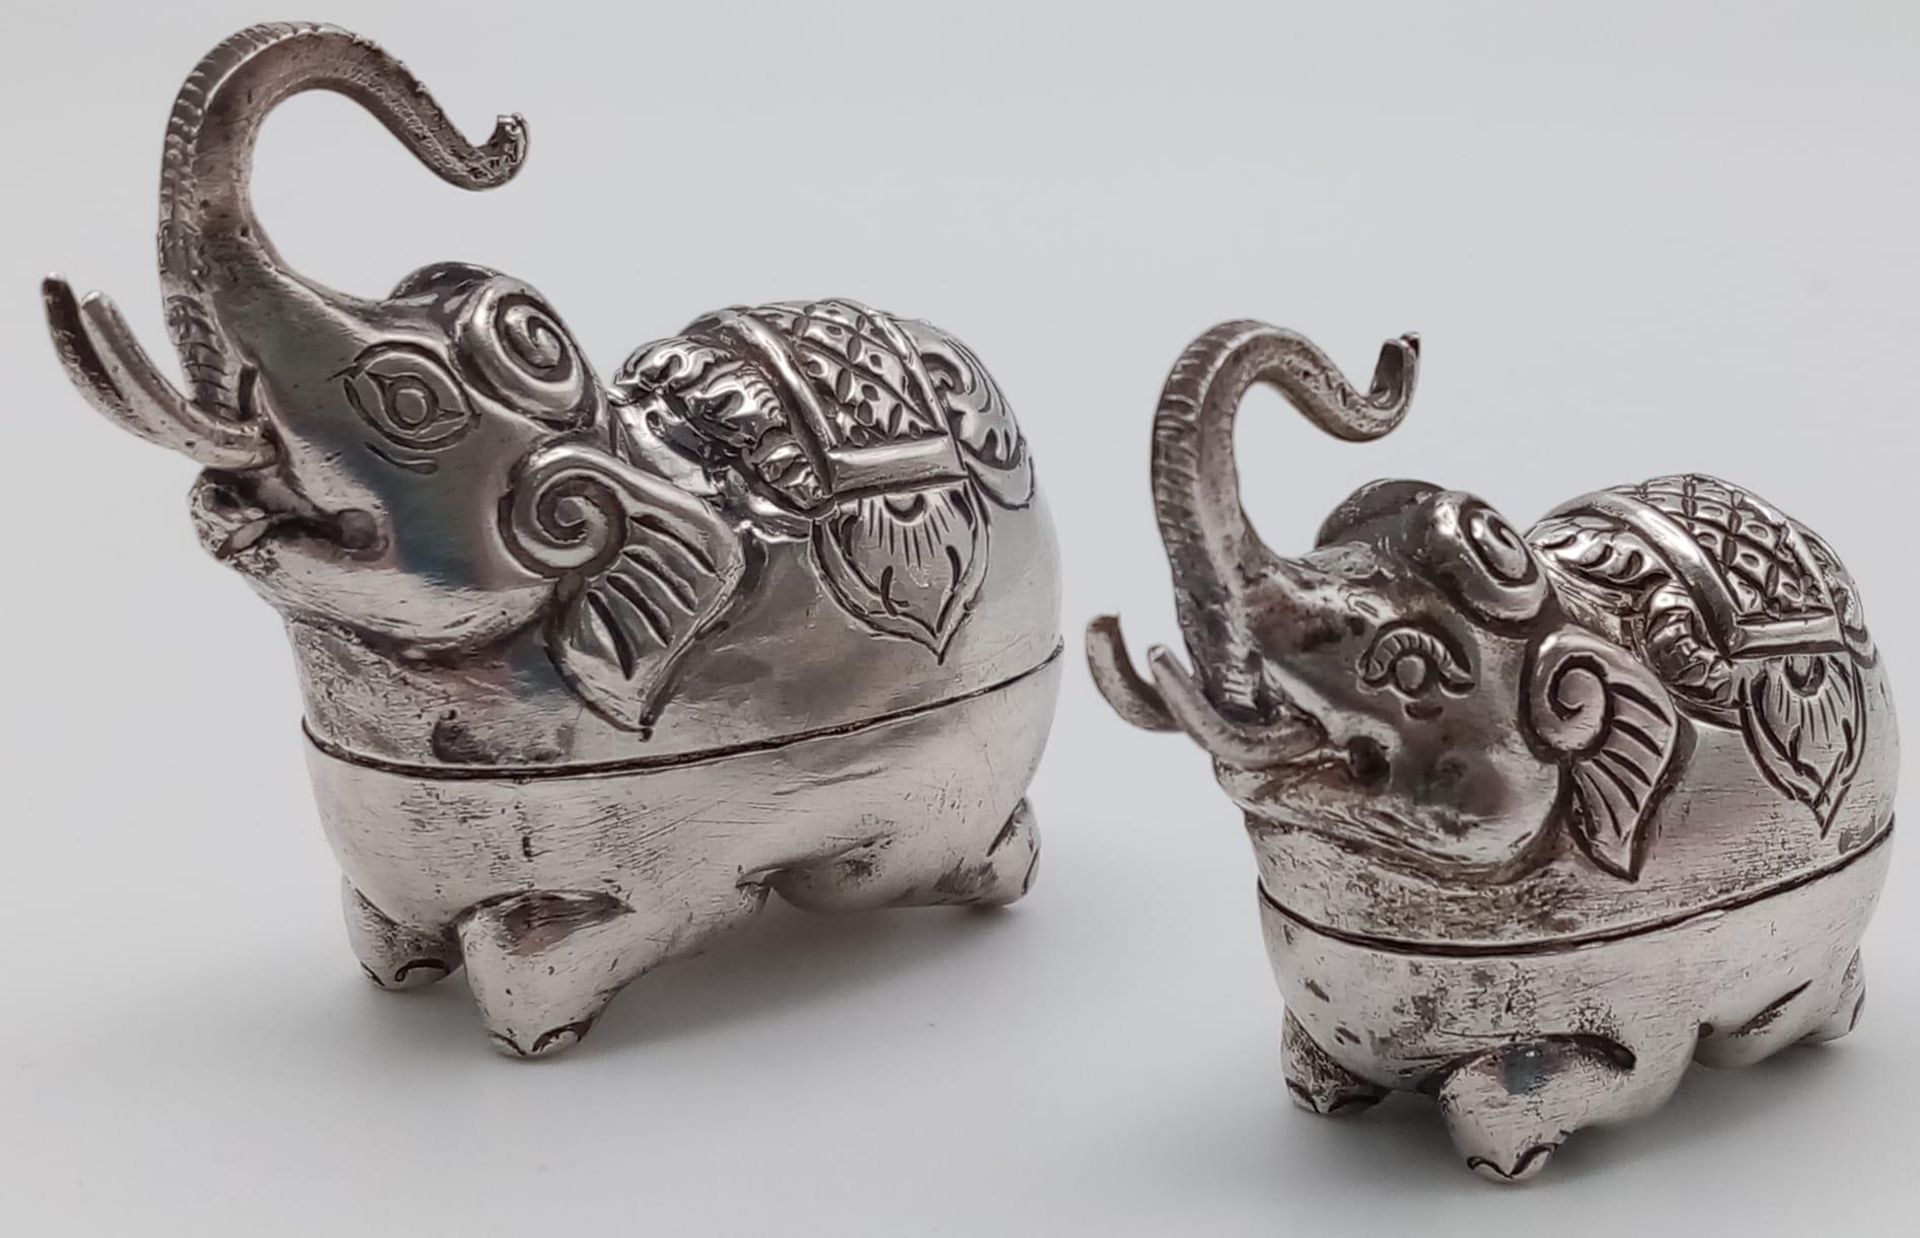 A pair of antique Cambodian silver elephant betel nut boxes. Made in the traditional Khmer silver